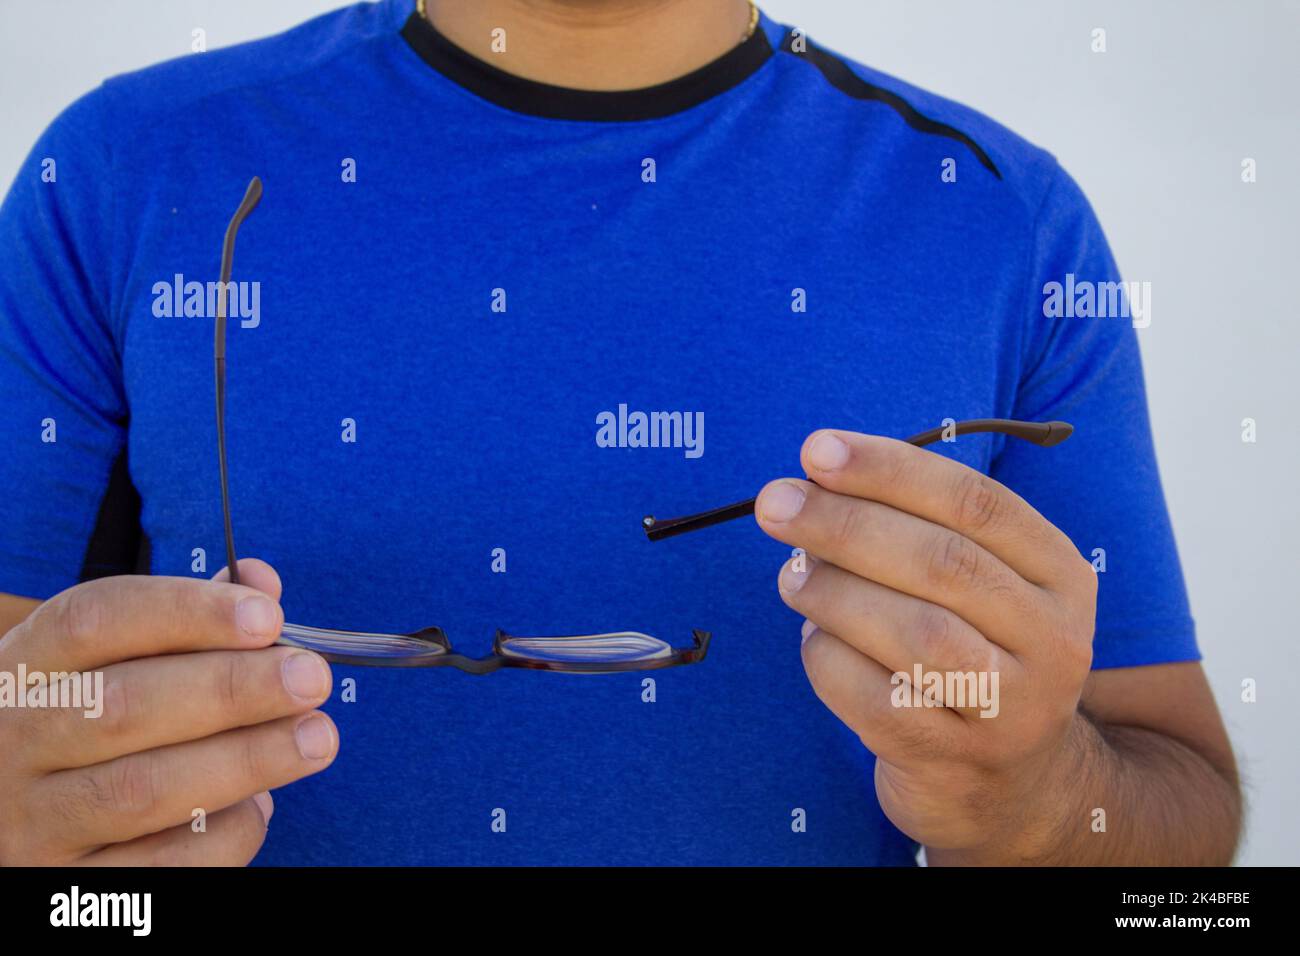 Image of a man holding a pair of broken eyeglasses. Breaking the temple of the glasses of a short-sighted boy Stock Photo